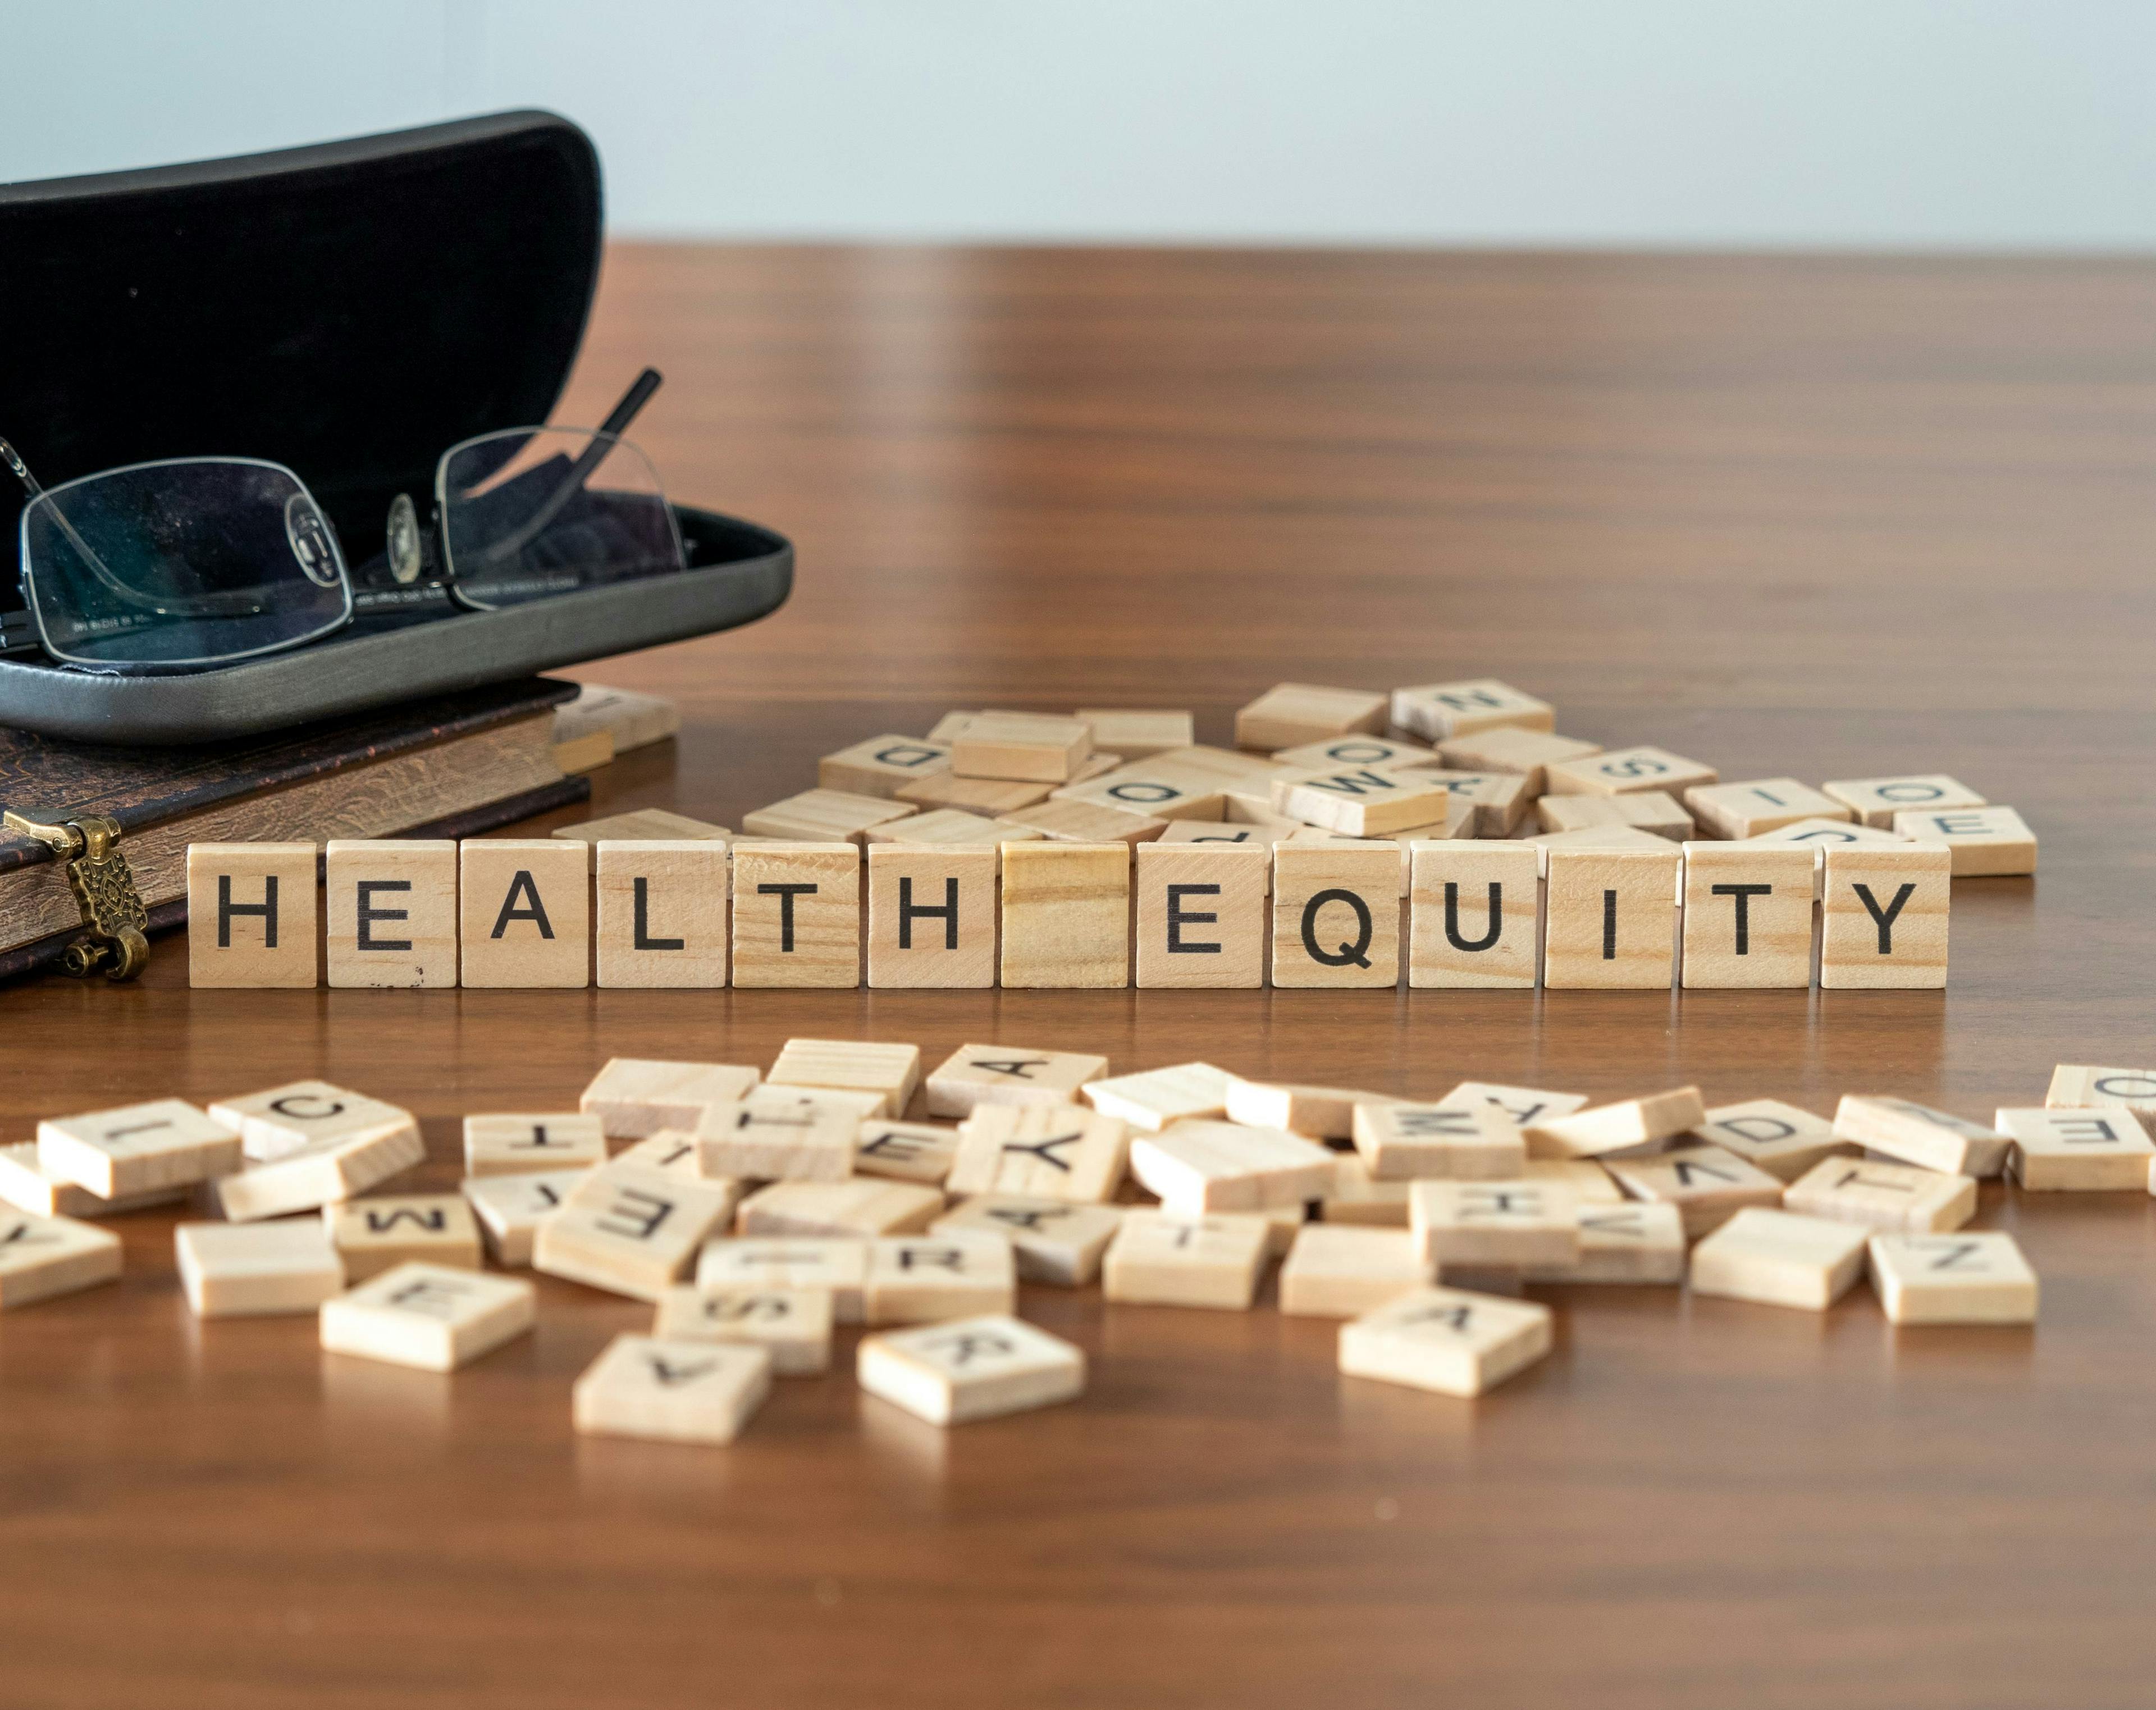 Health equity the word or concept represented by wooden letter tiles - Image credit: lexiconimages | stock.adobe.com